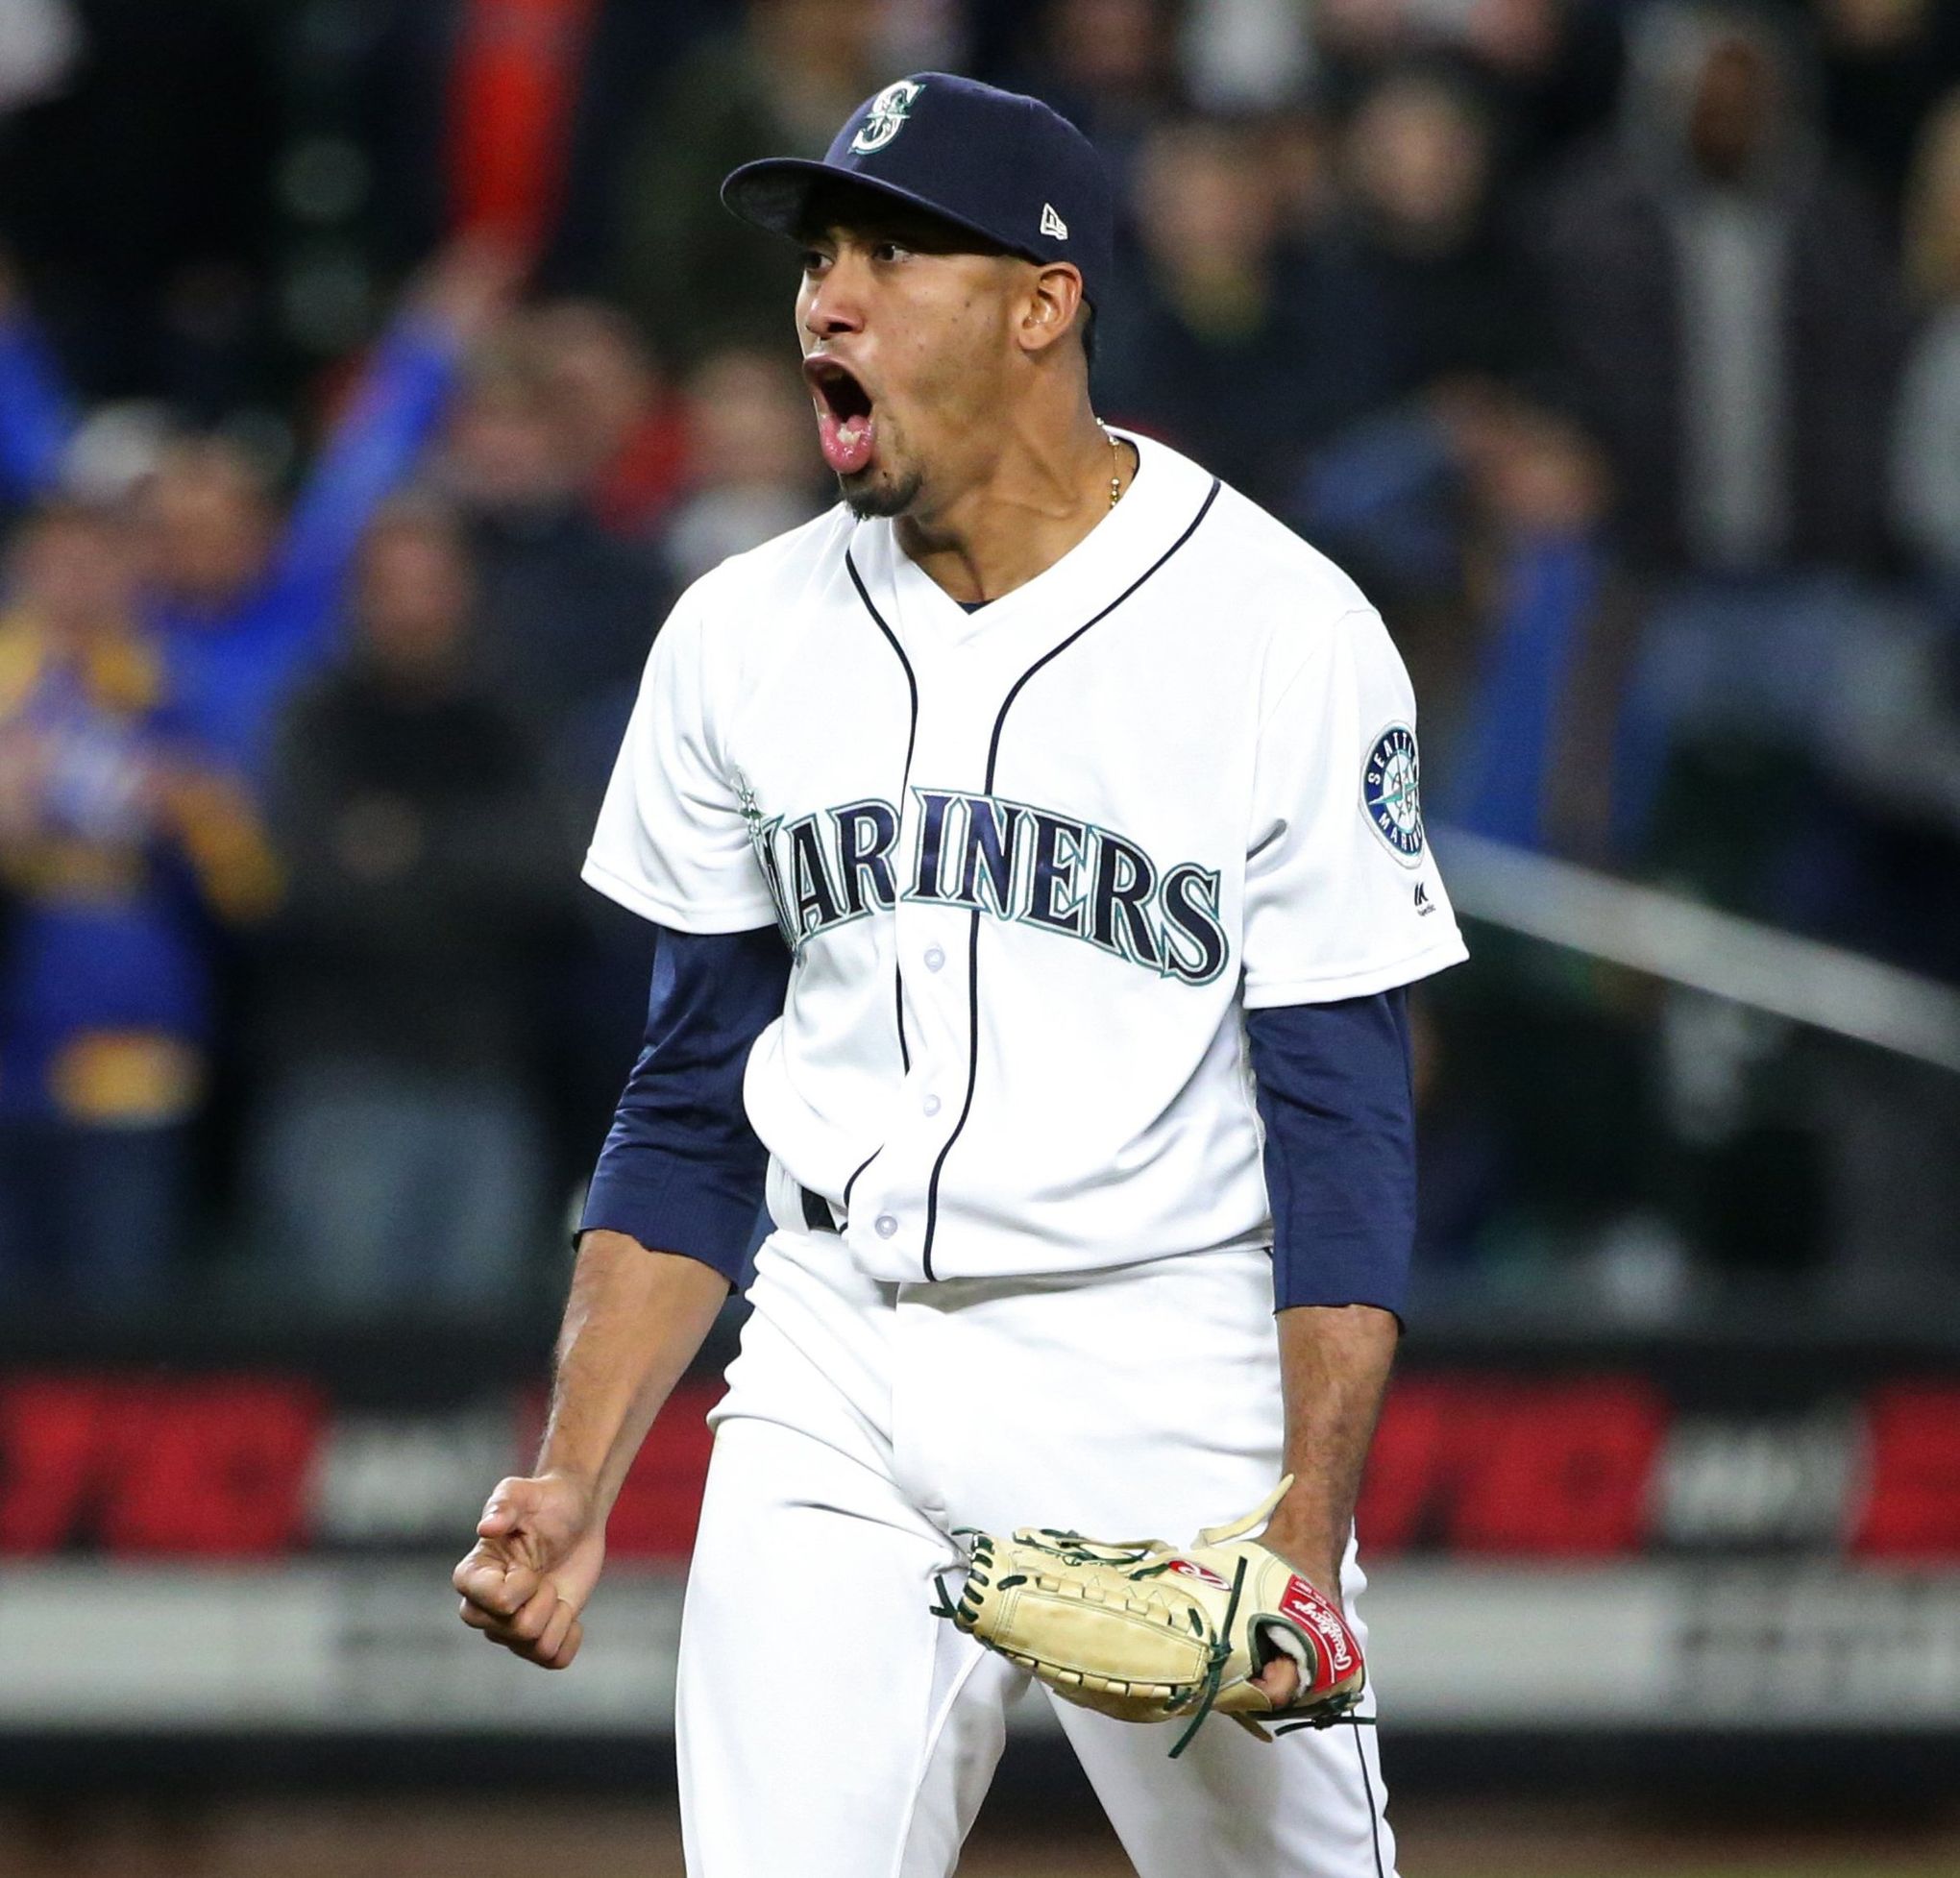 Edwin Diaz inches closer to history. Mariners needed that behind